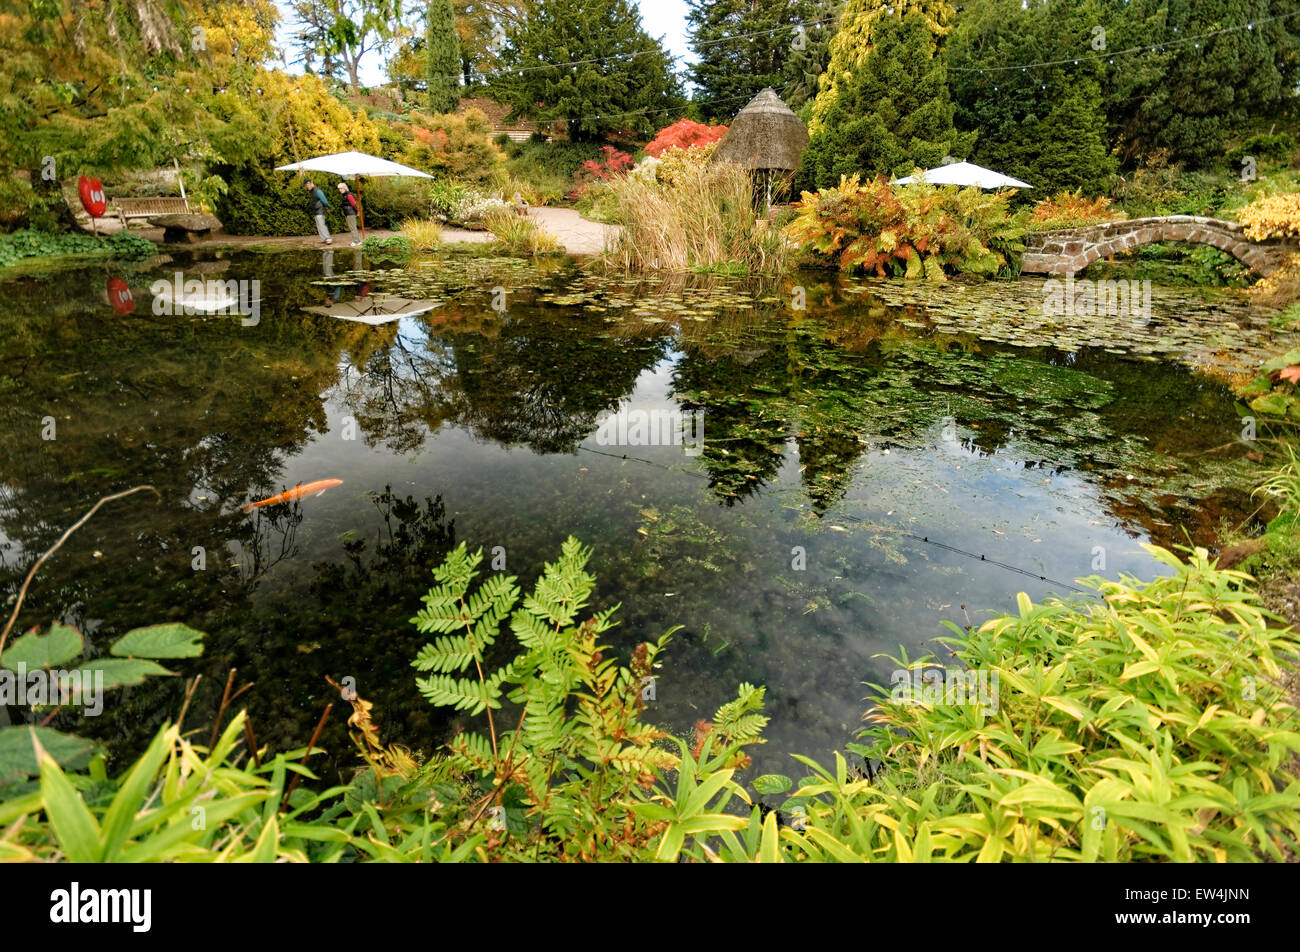 Ness Botanic Gardens are situated near the English and Welsh Border in Cheshire, near to the city of Chester . Stock Photo